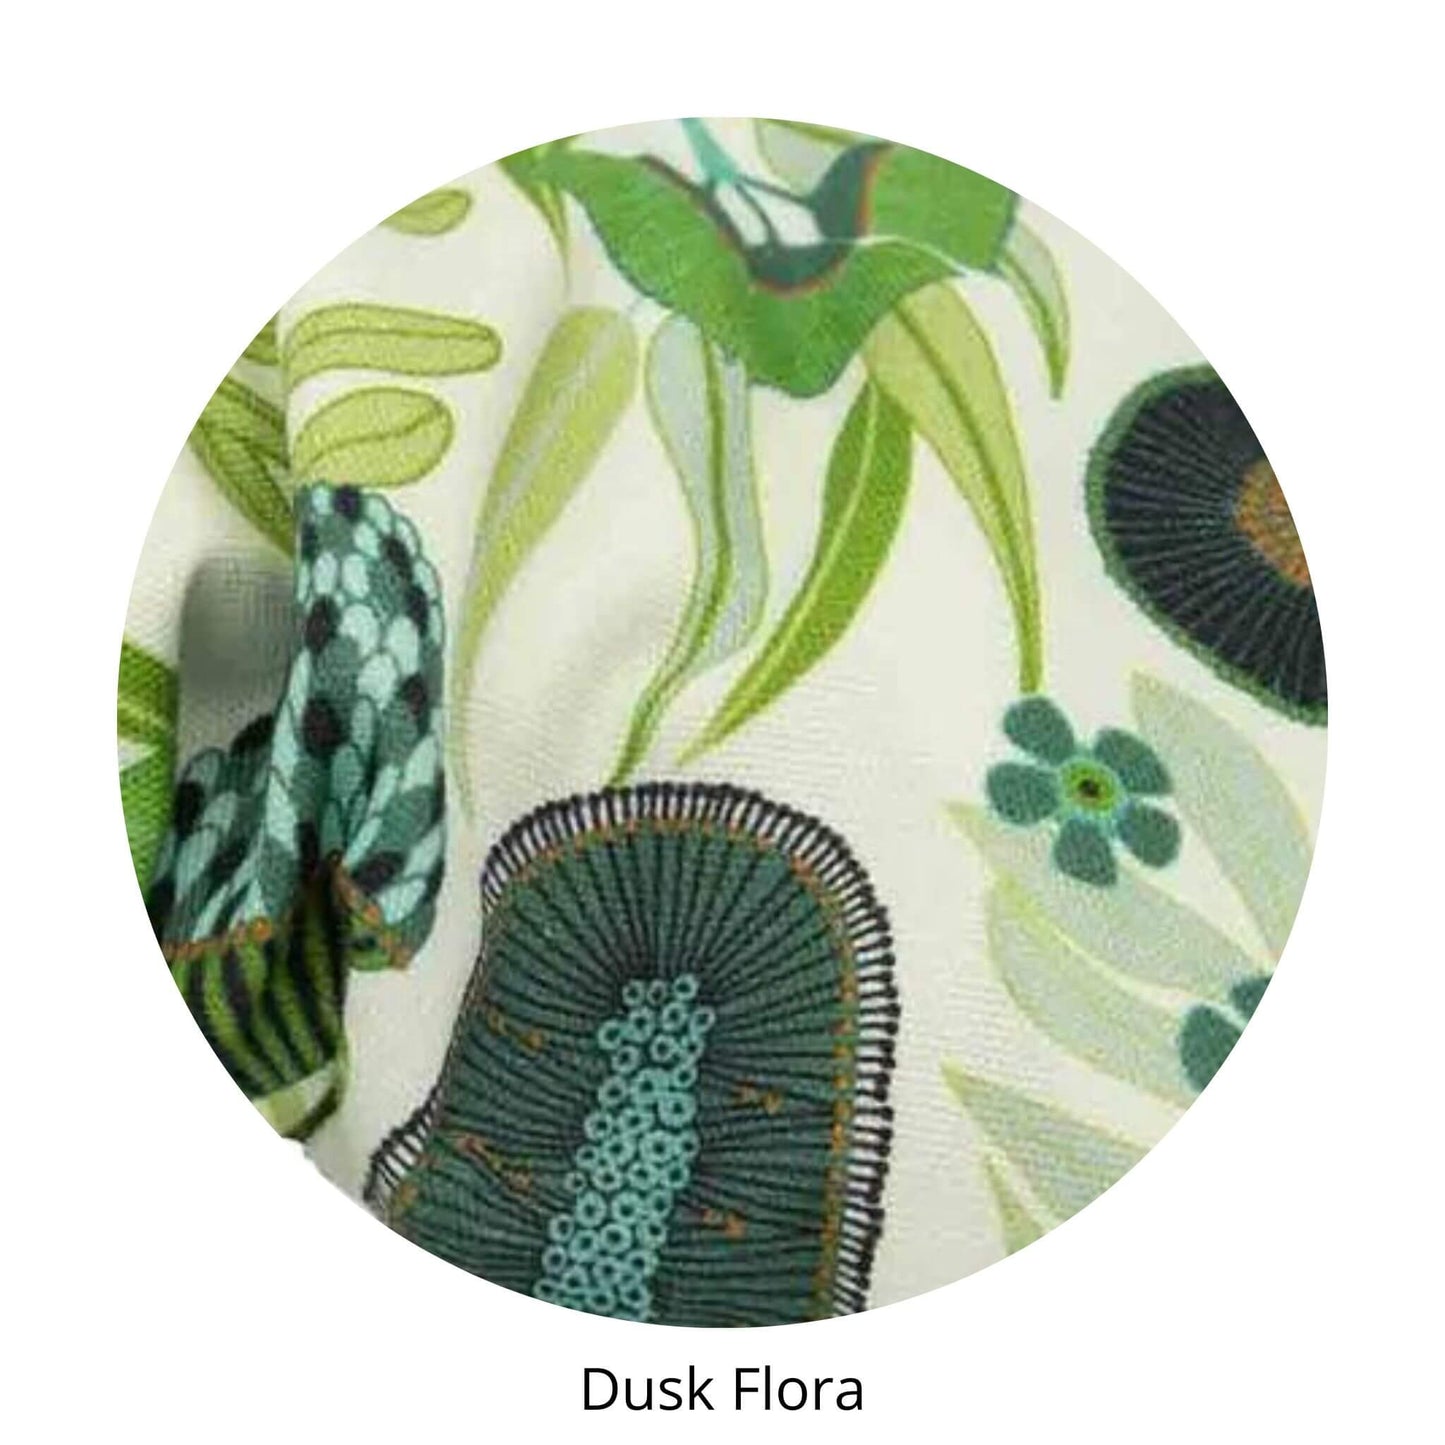 Bek + Eula wheat bag heat and cool packs in various colours - dusk Flora swatch